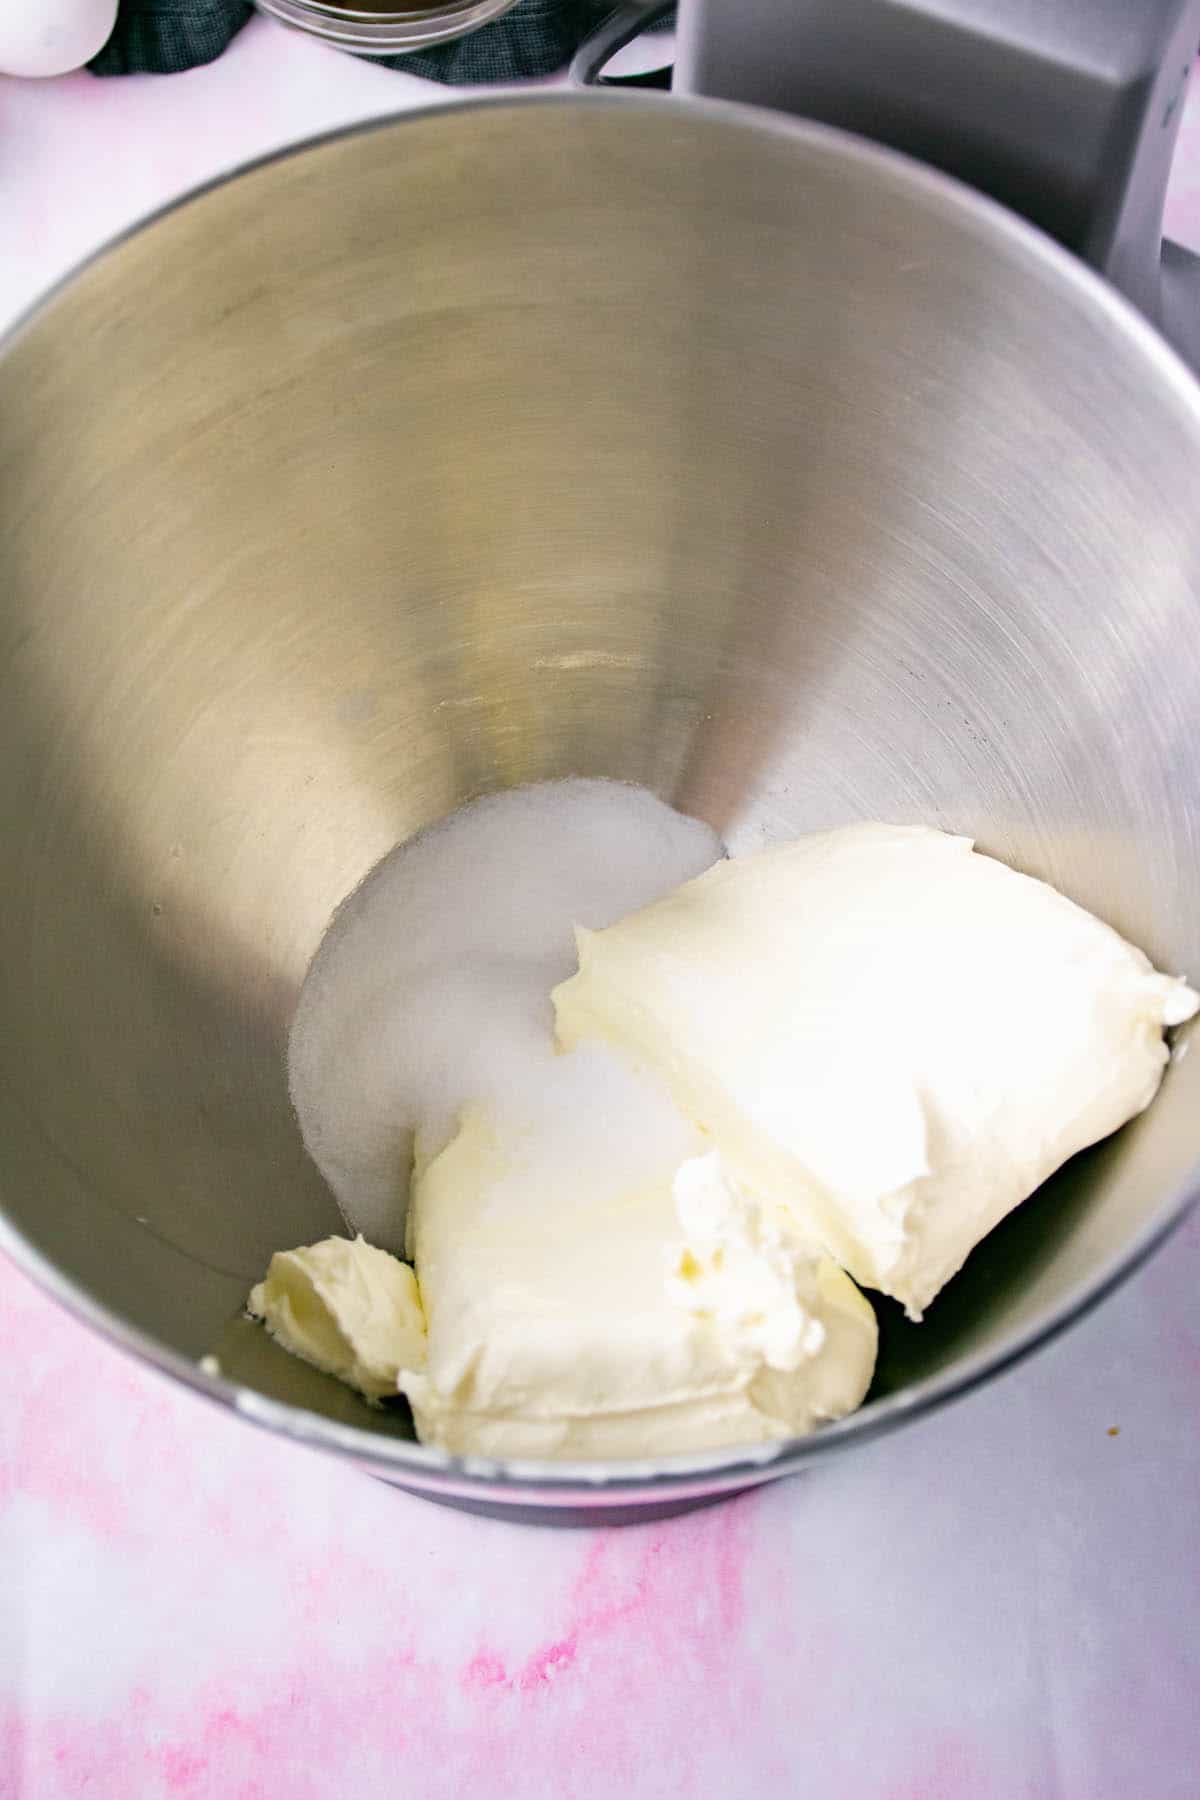 Sugar and cream cheese in a stainless bowl on a marble table.